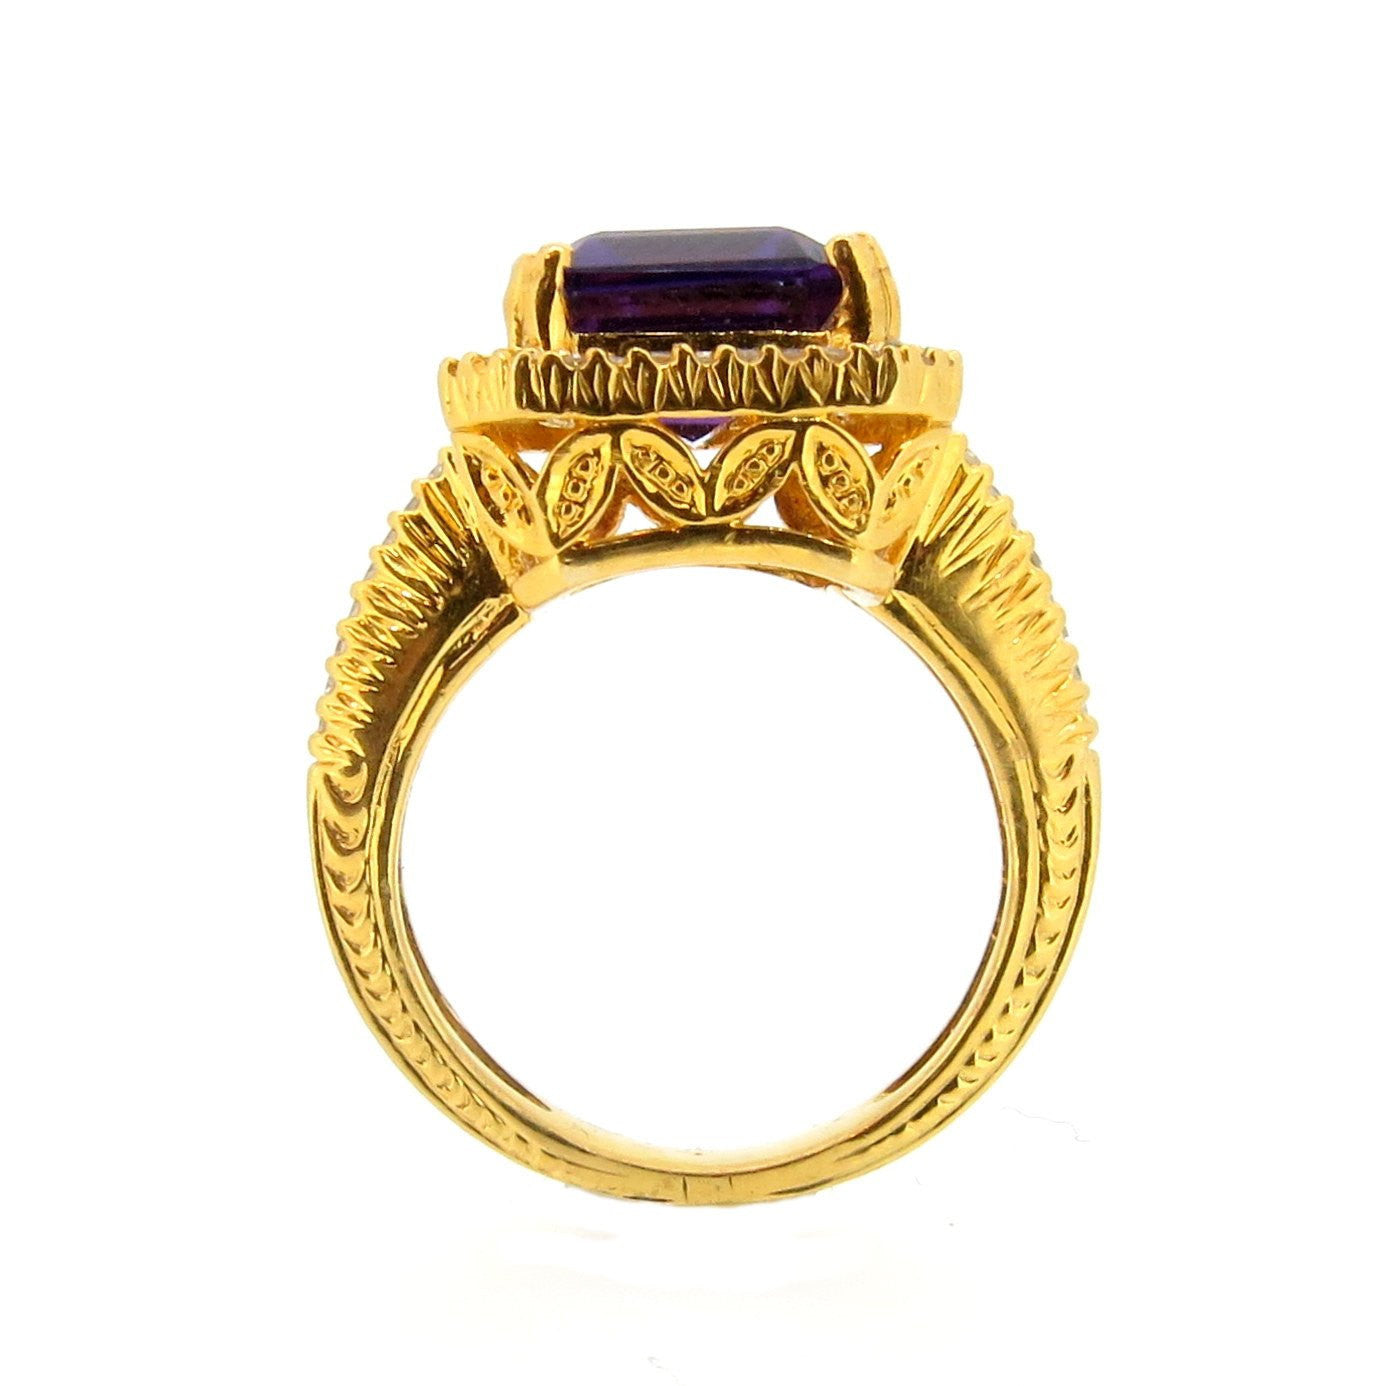 SALE! Amethyst Gemstone and Diamond Cocktail Ring, Alternative Engagement Ring